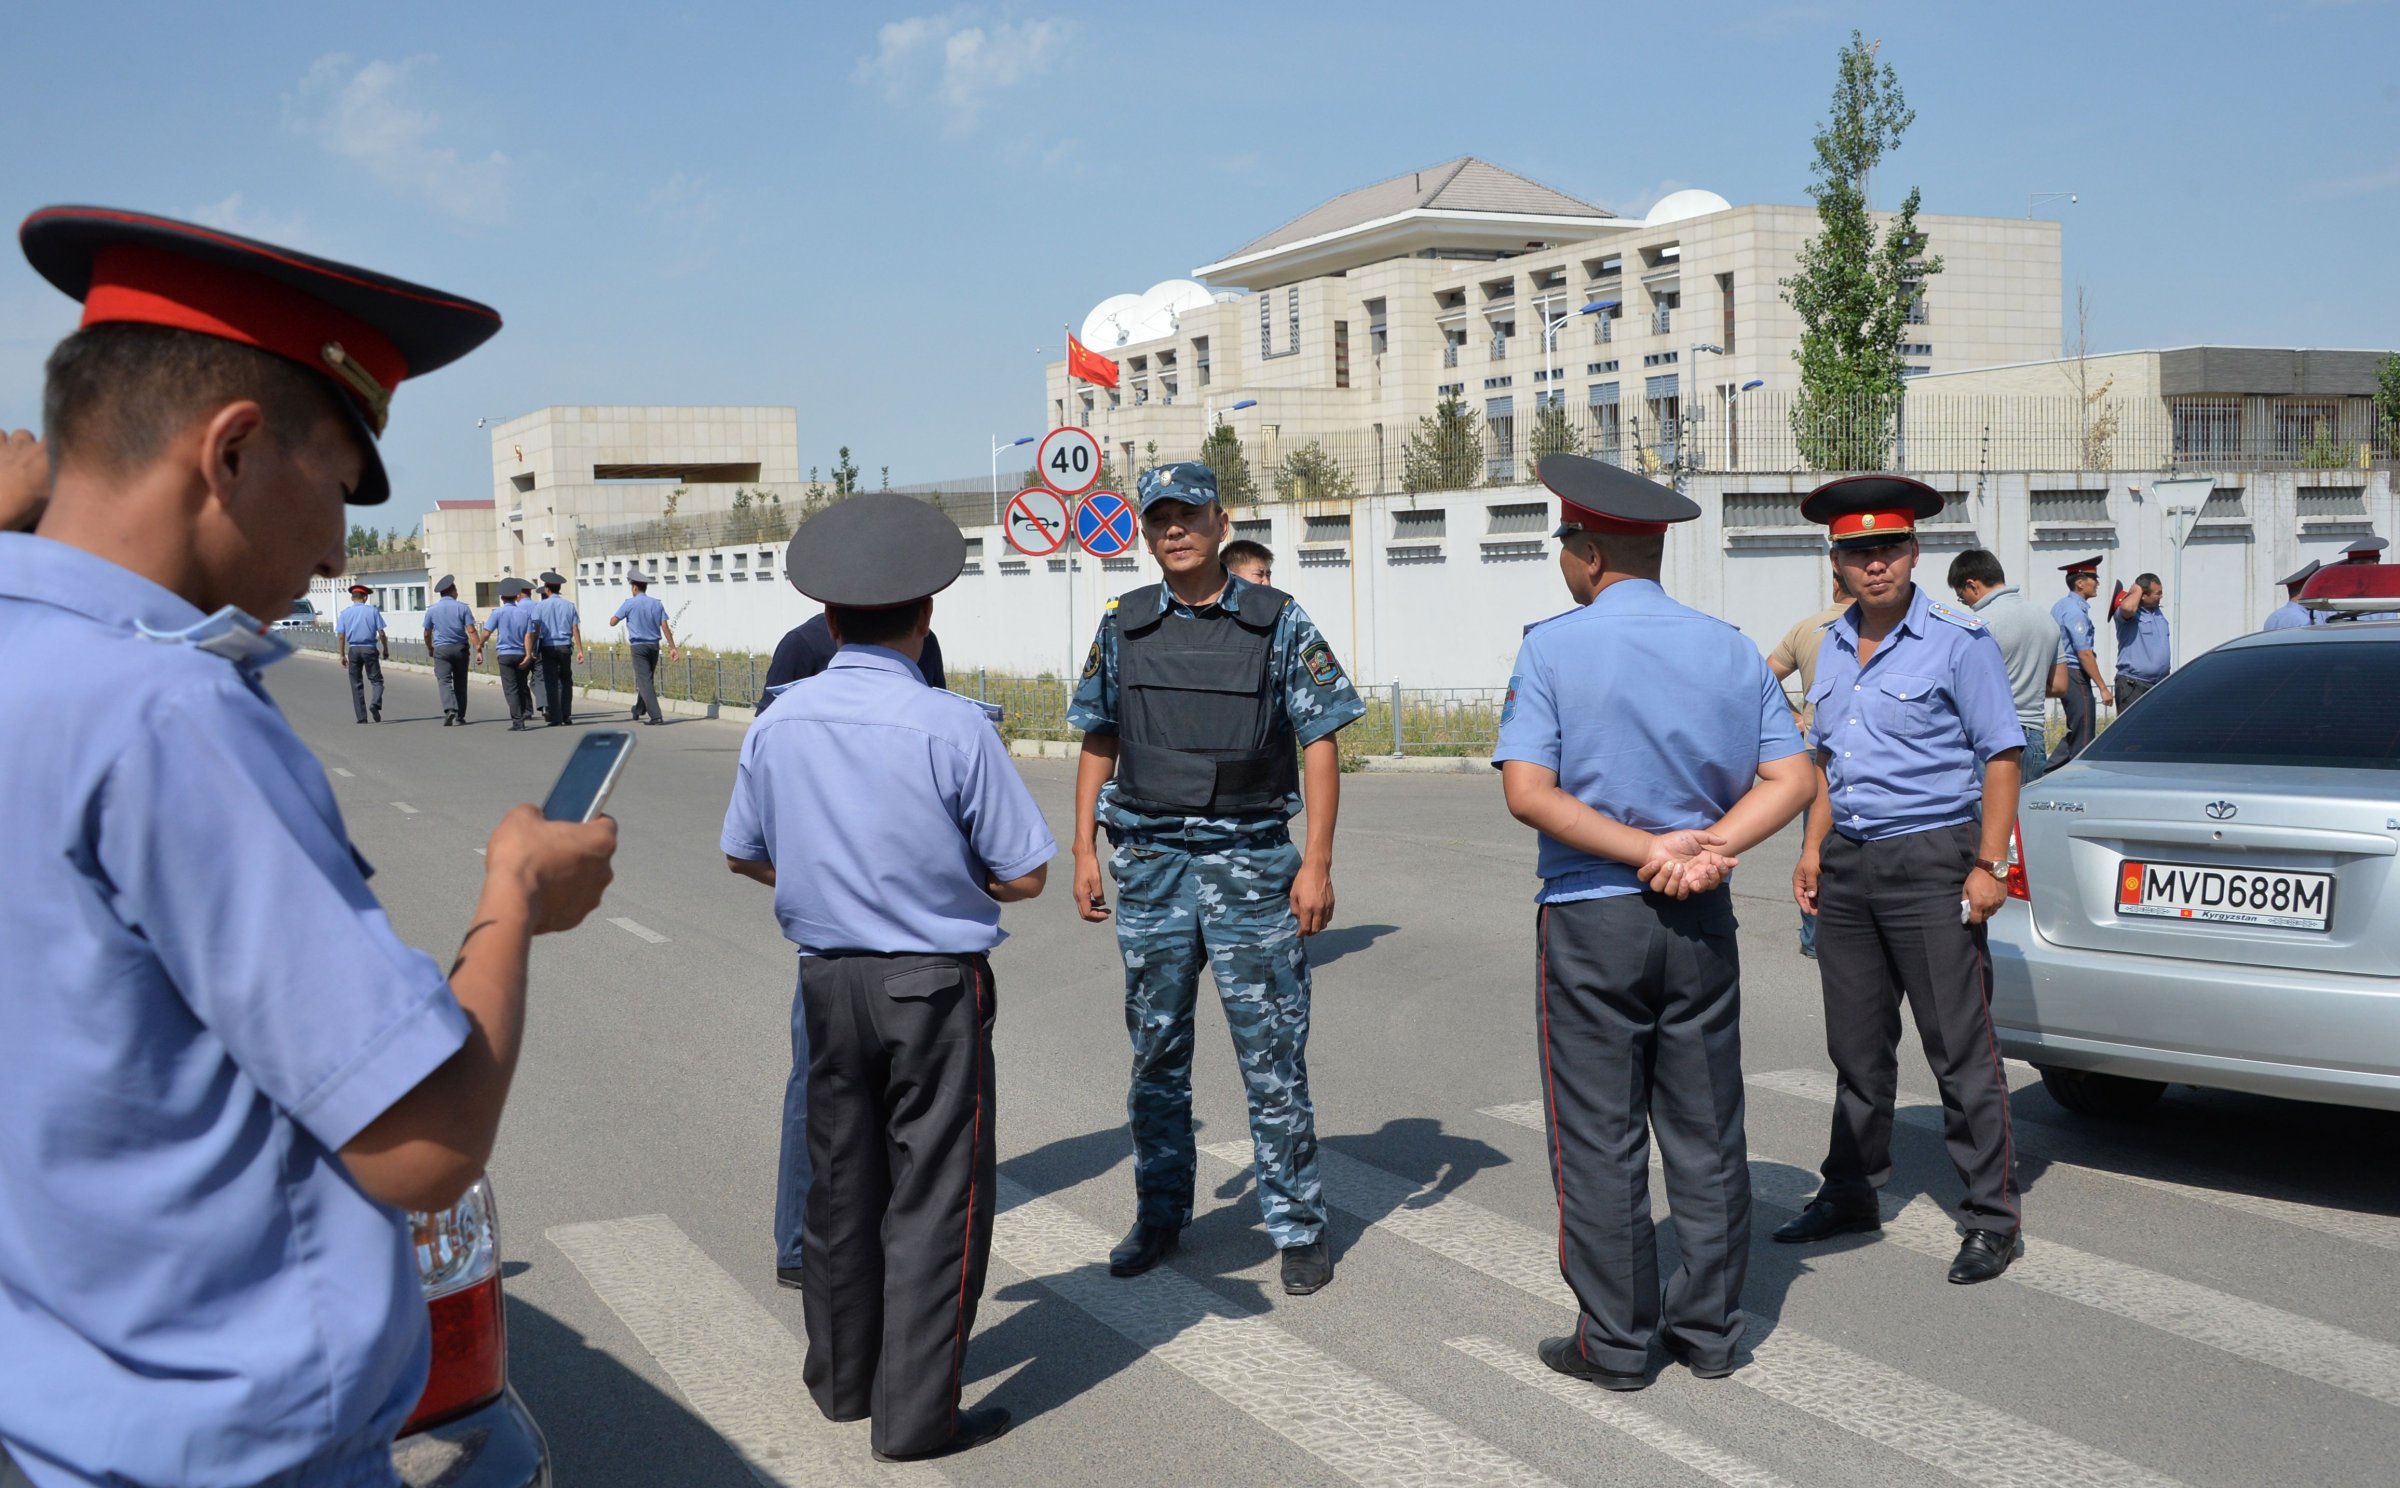 Police officers gather outside the Chinese embassy in Bishkek, Kyrgyzstan, on Aug. 30, 2016. A van driven by a suicide bomber exploded after ramming through a gate.